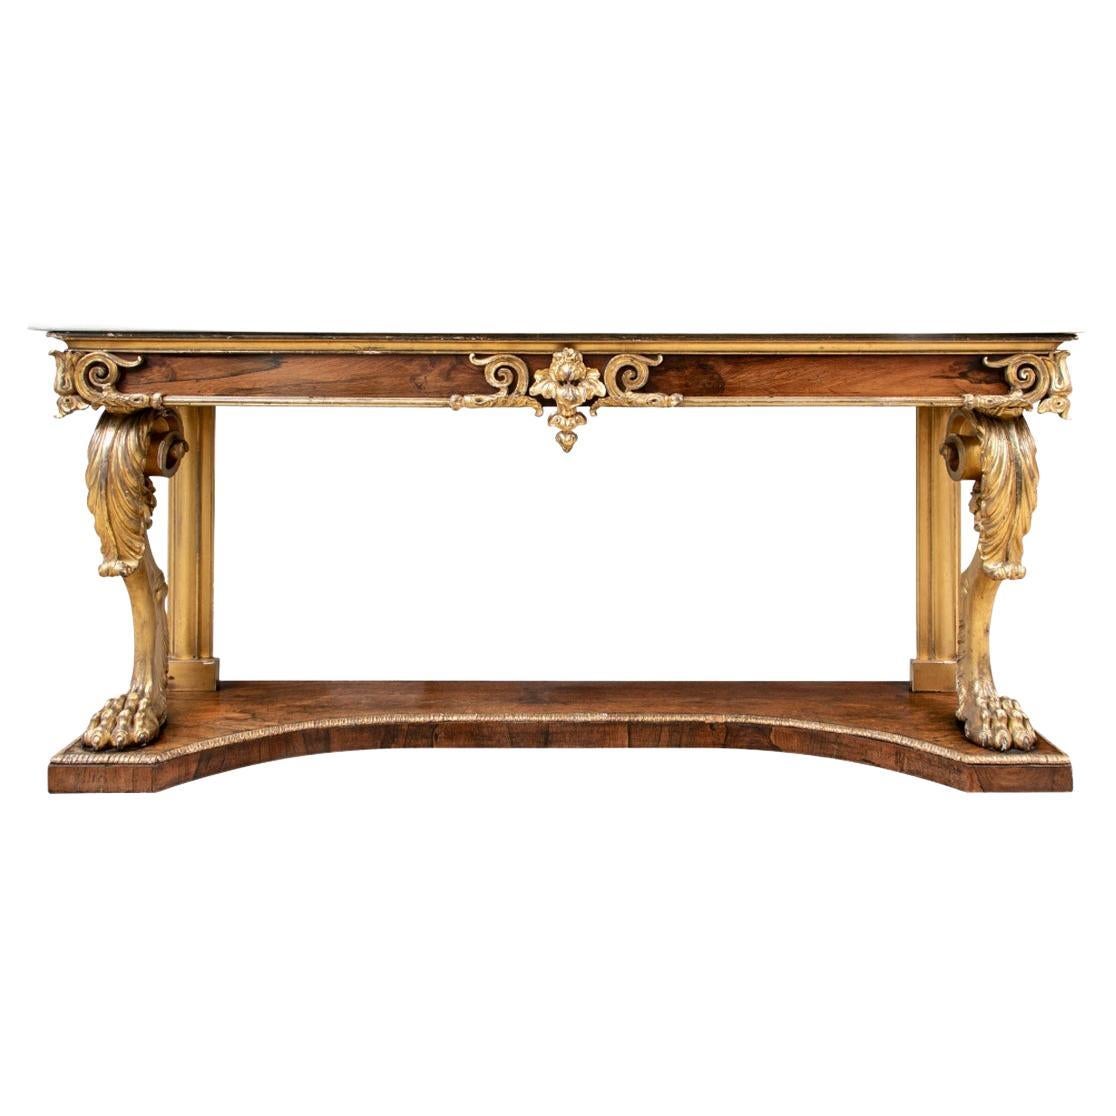 19th C. Rosewood Marble Top Carved and Gilt Pier Table